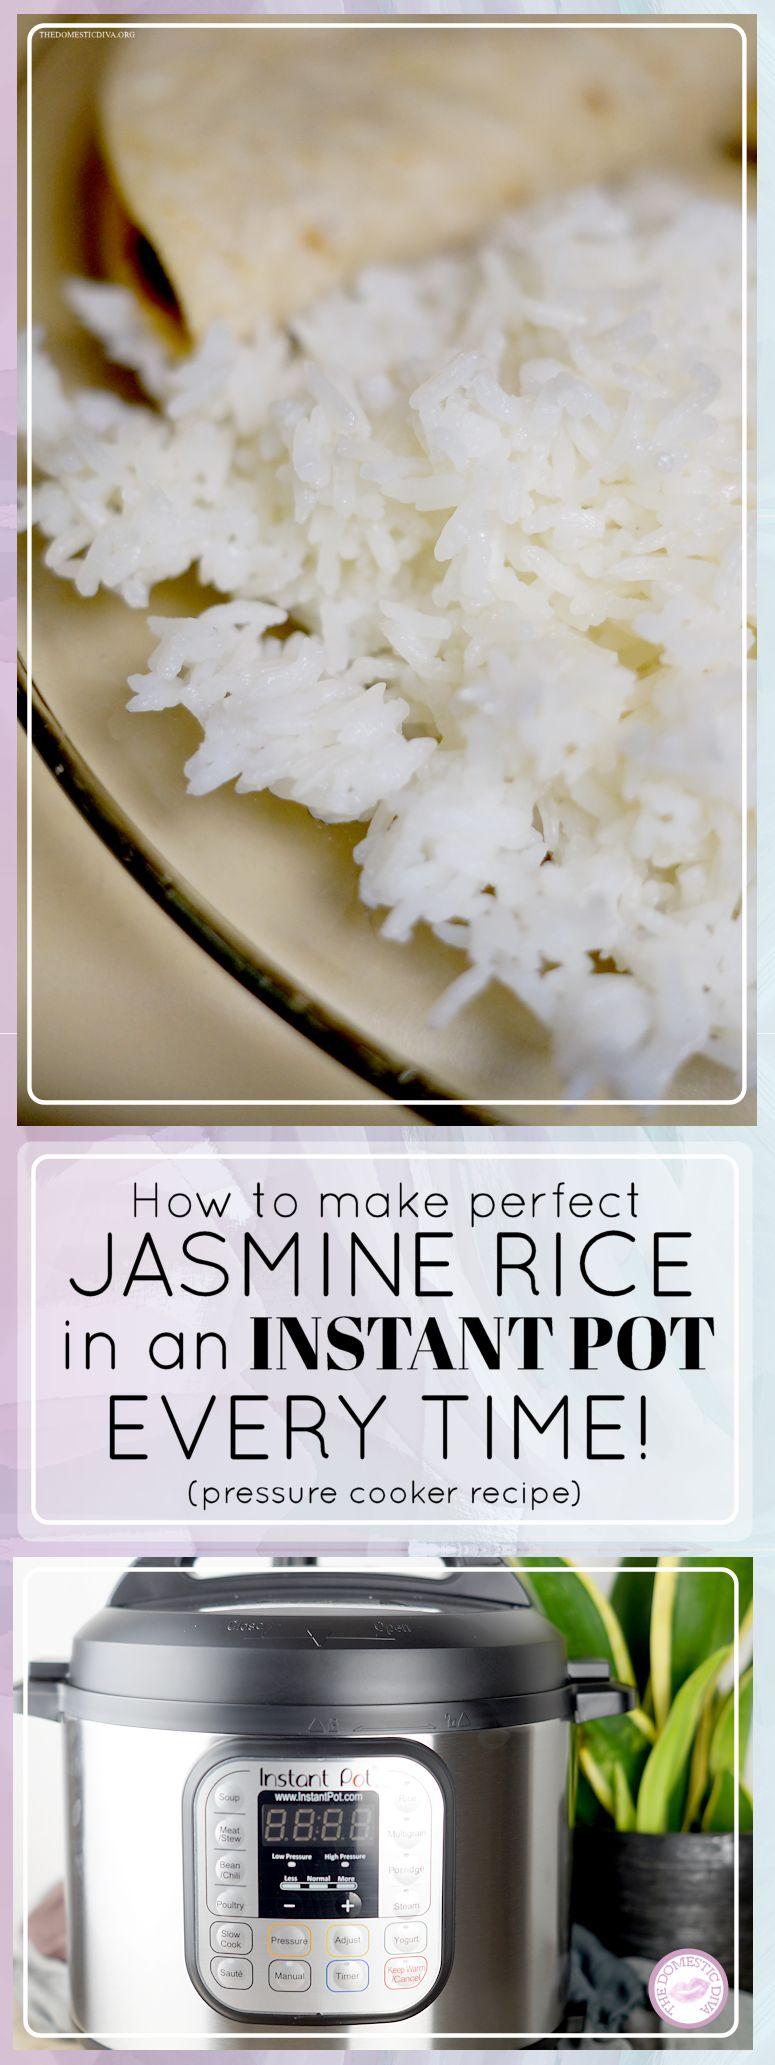 How to make Jasmine Rice in an Instant Pot (Pressure Cooker Recipe)